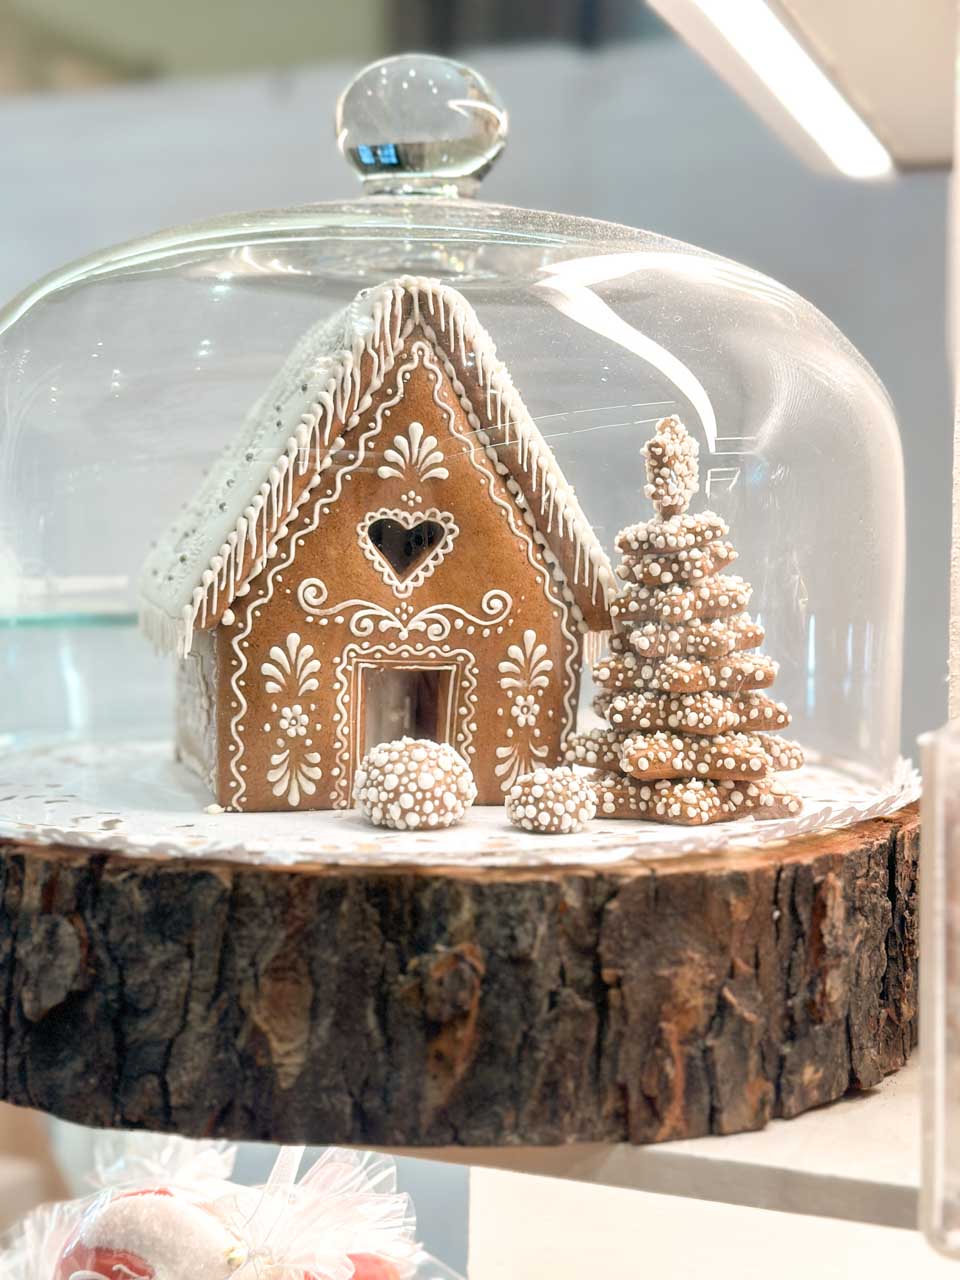 A gingerbread house under a glass dome, intricately decorated with white icing, and a festive tree